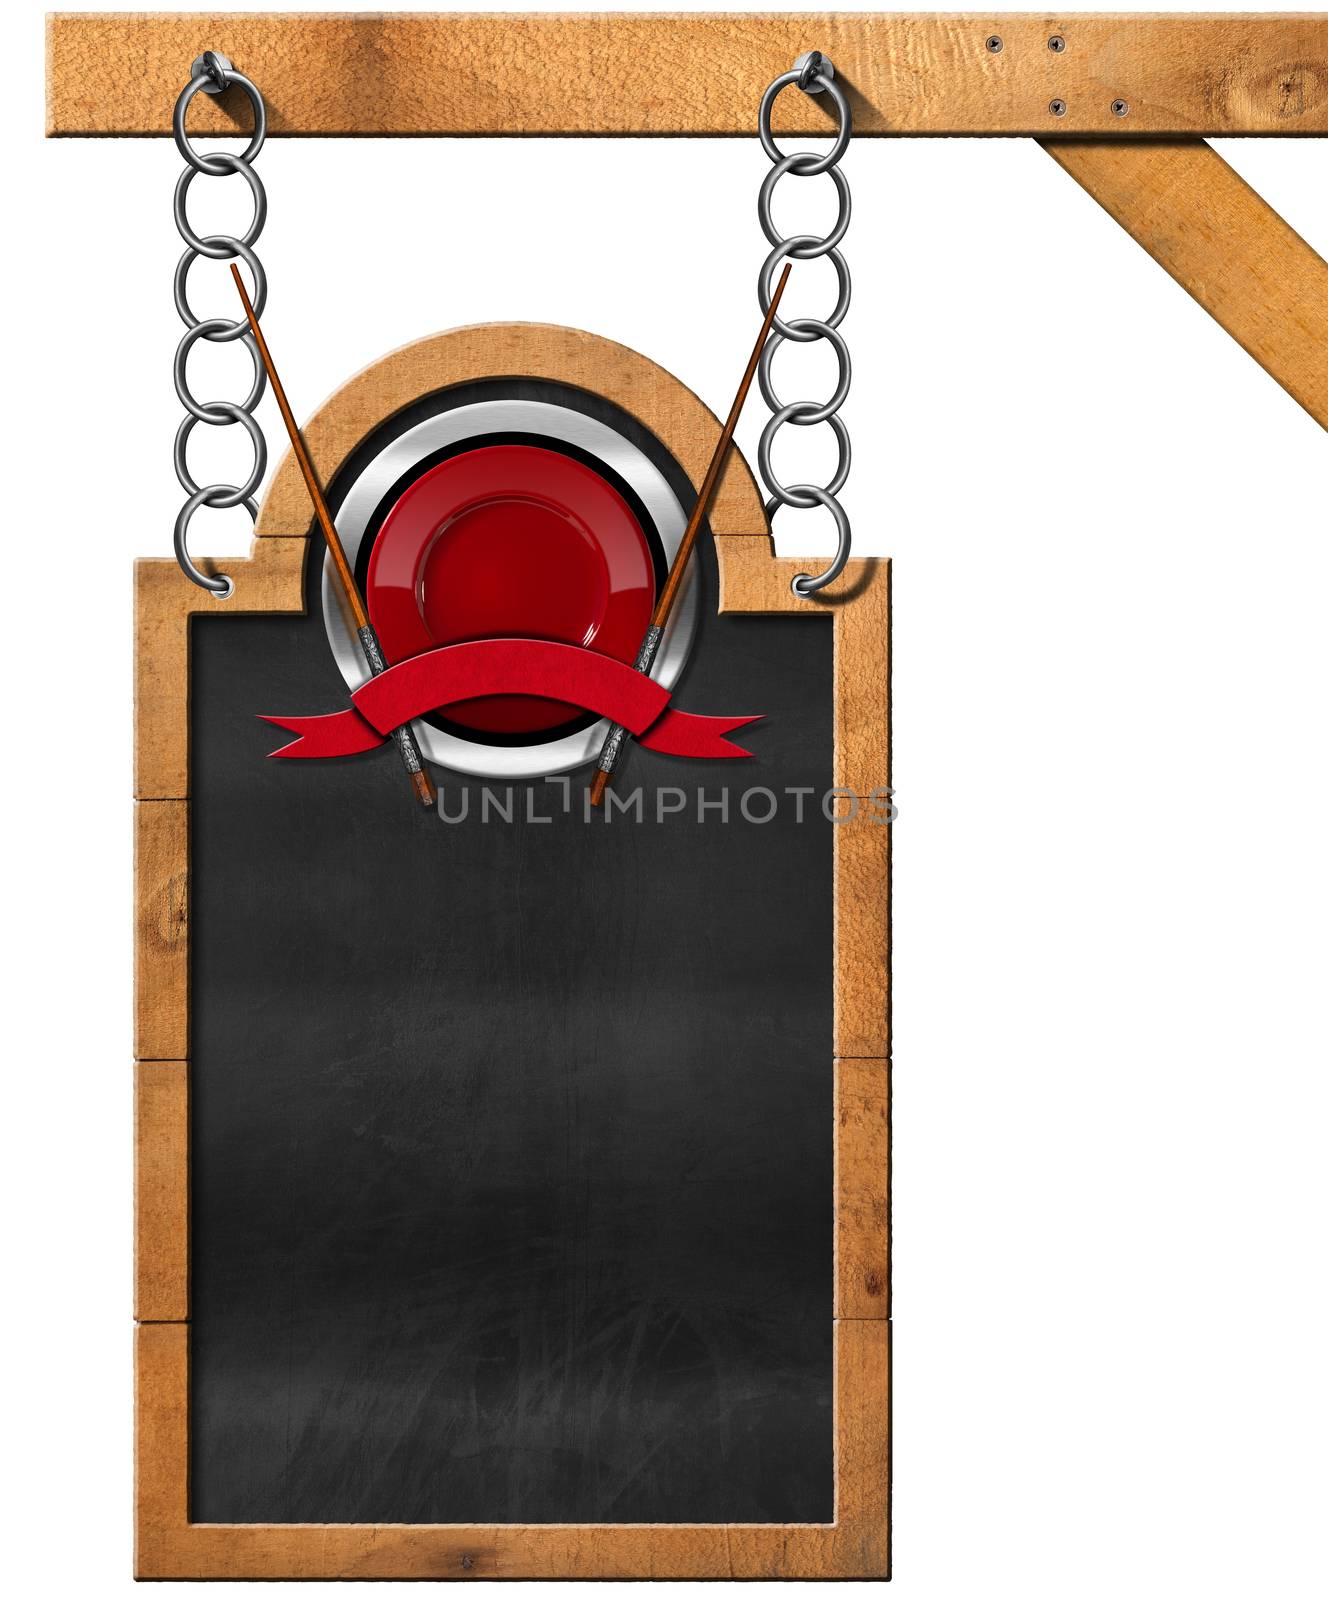 Empty blackboard with wooden frame and symbol for an Asian menu. Hanging from a metal chain on wooden pole and isolated on white